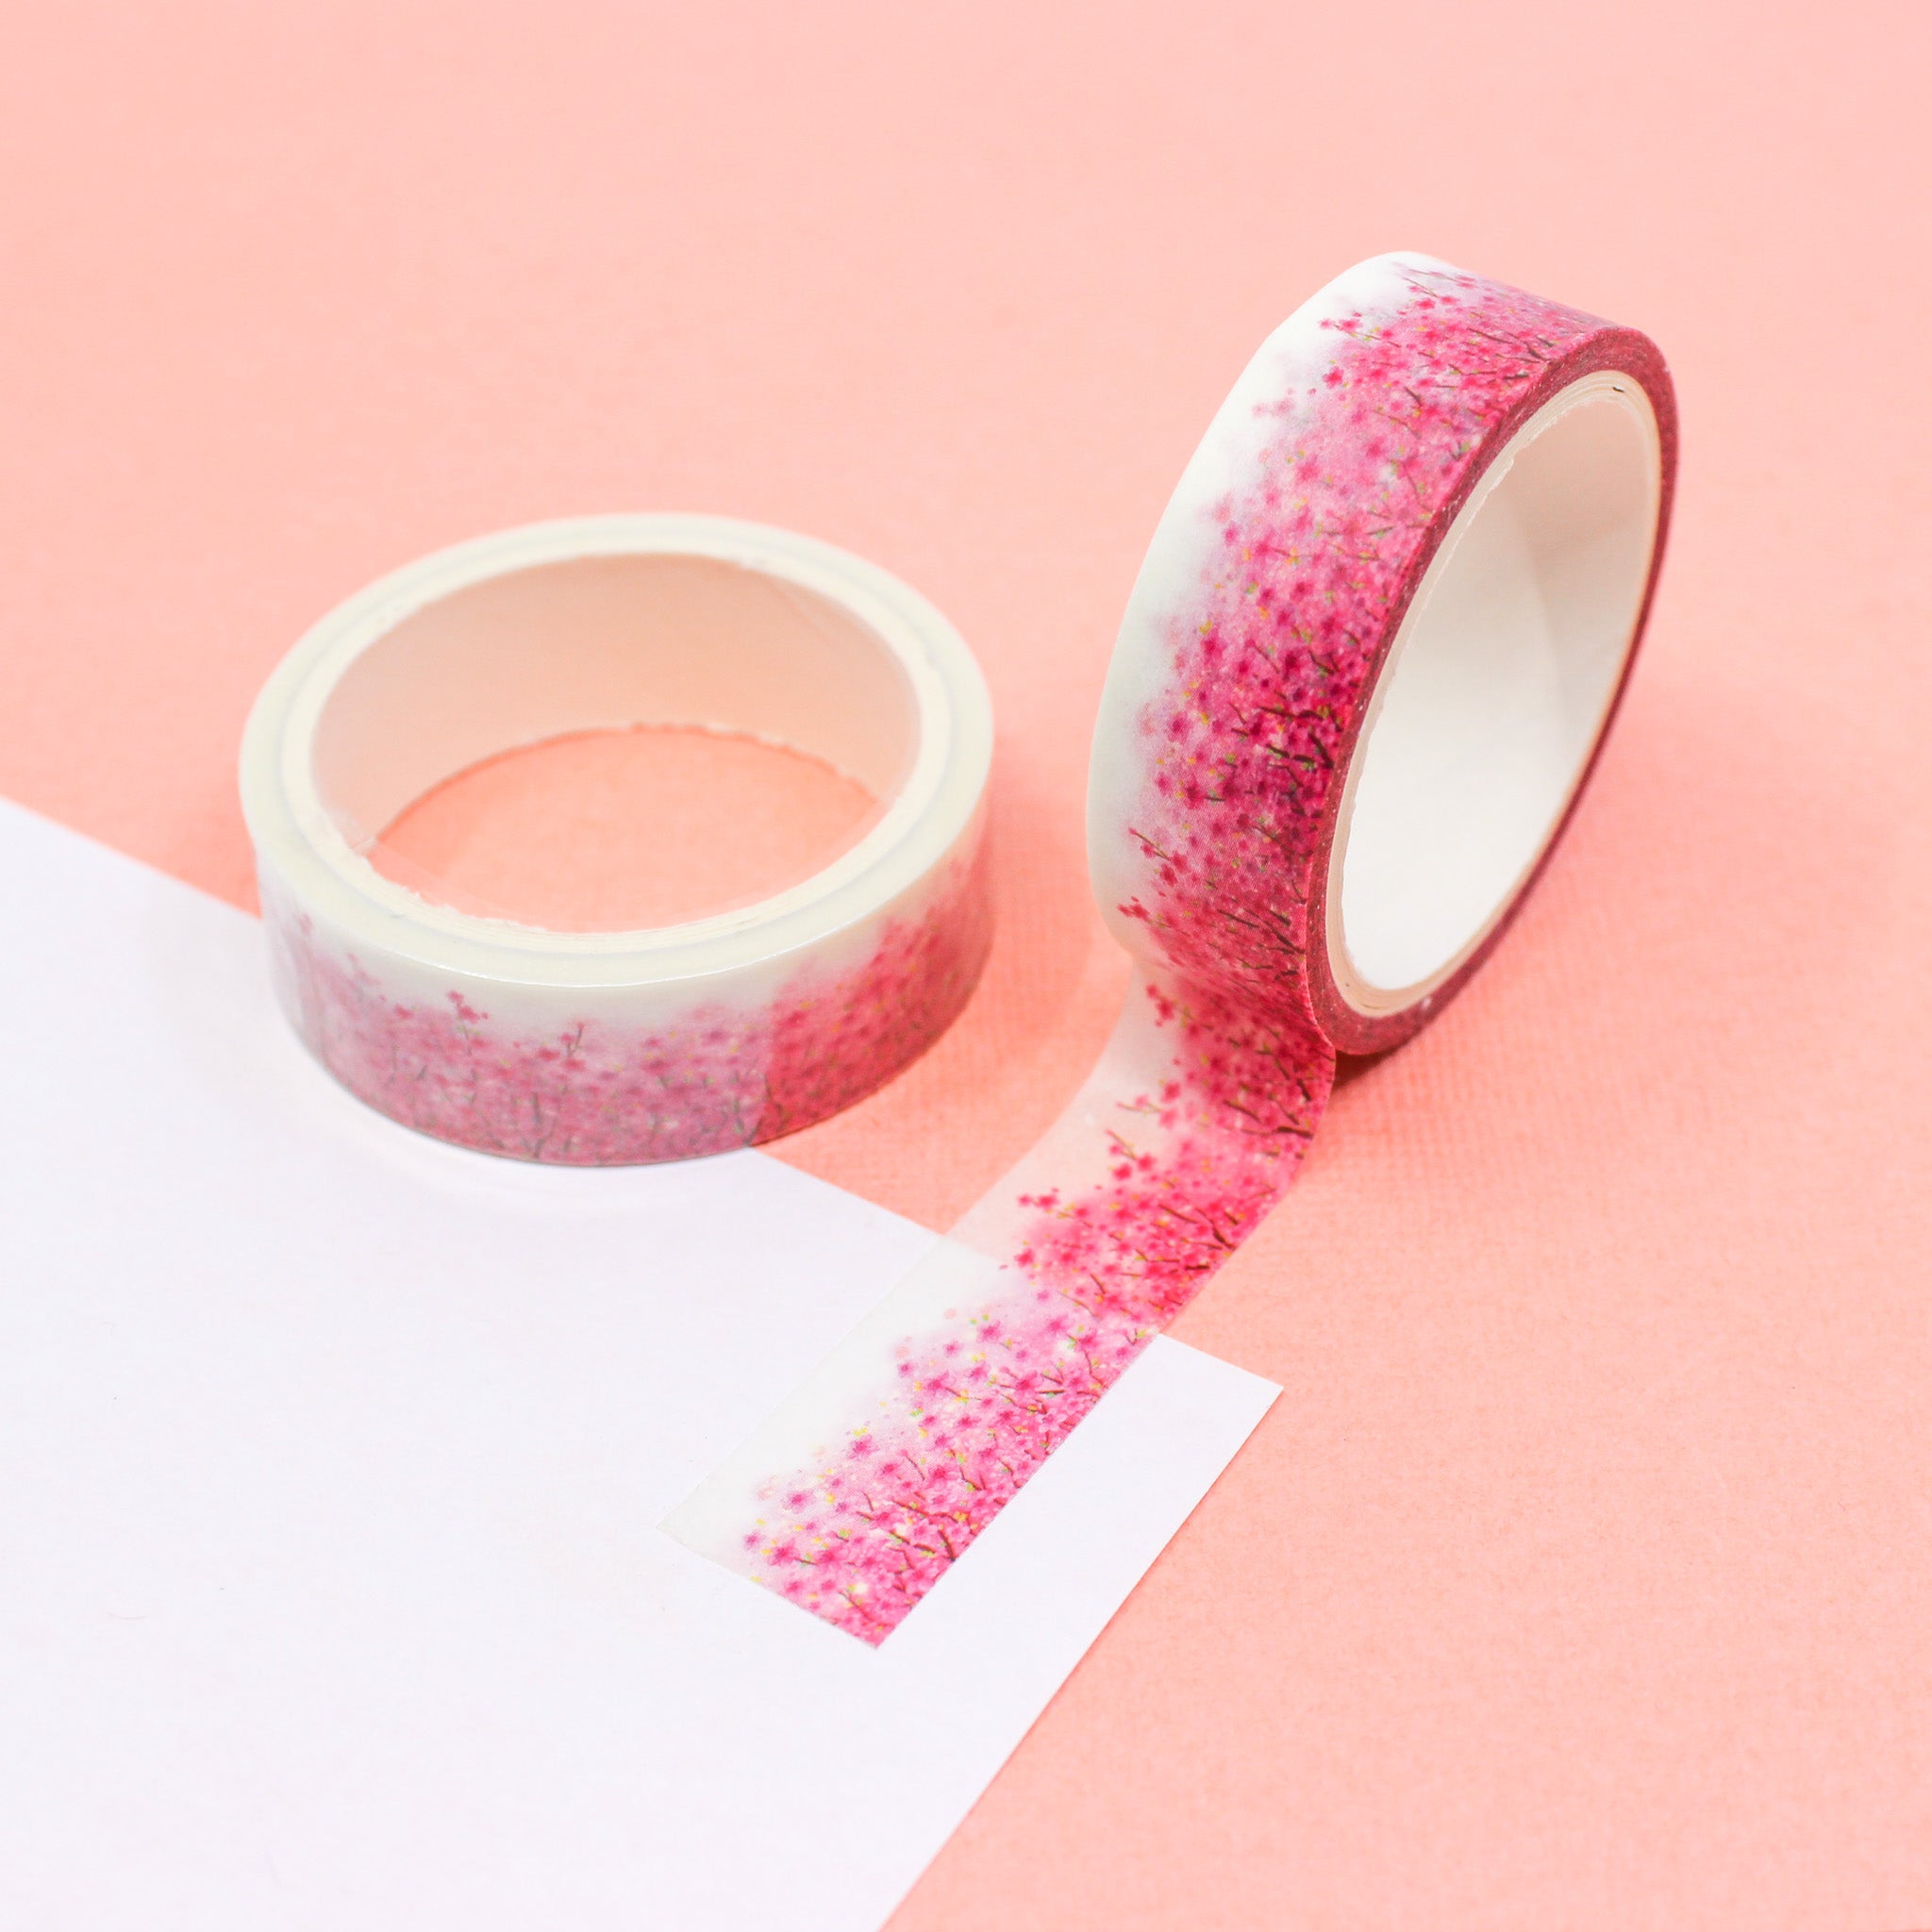 This a pink cherry blossoms pattern washi tape from BBB Supplies Craft Shop